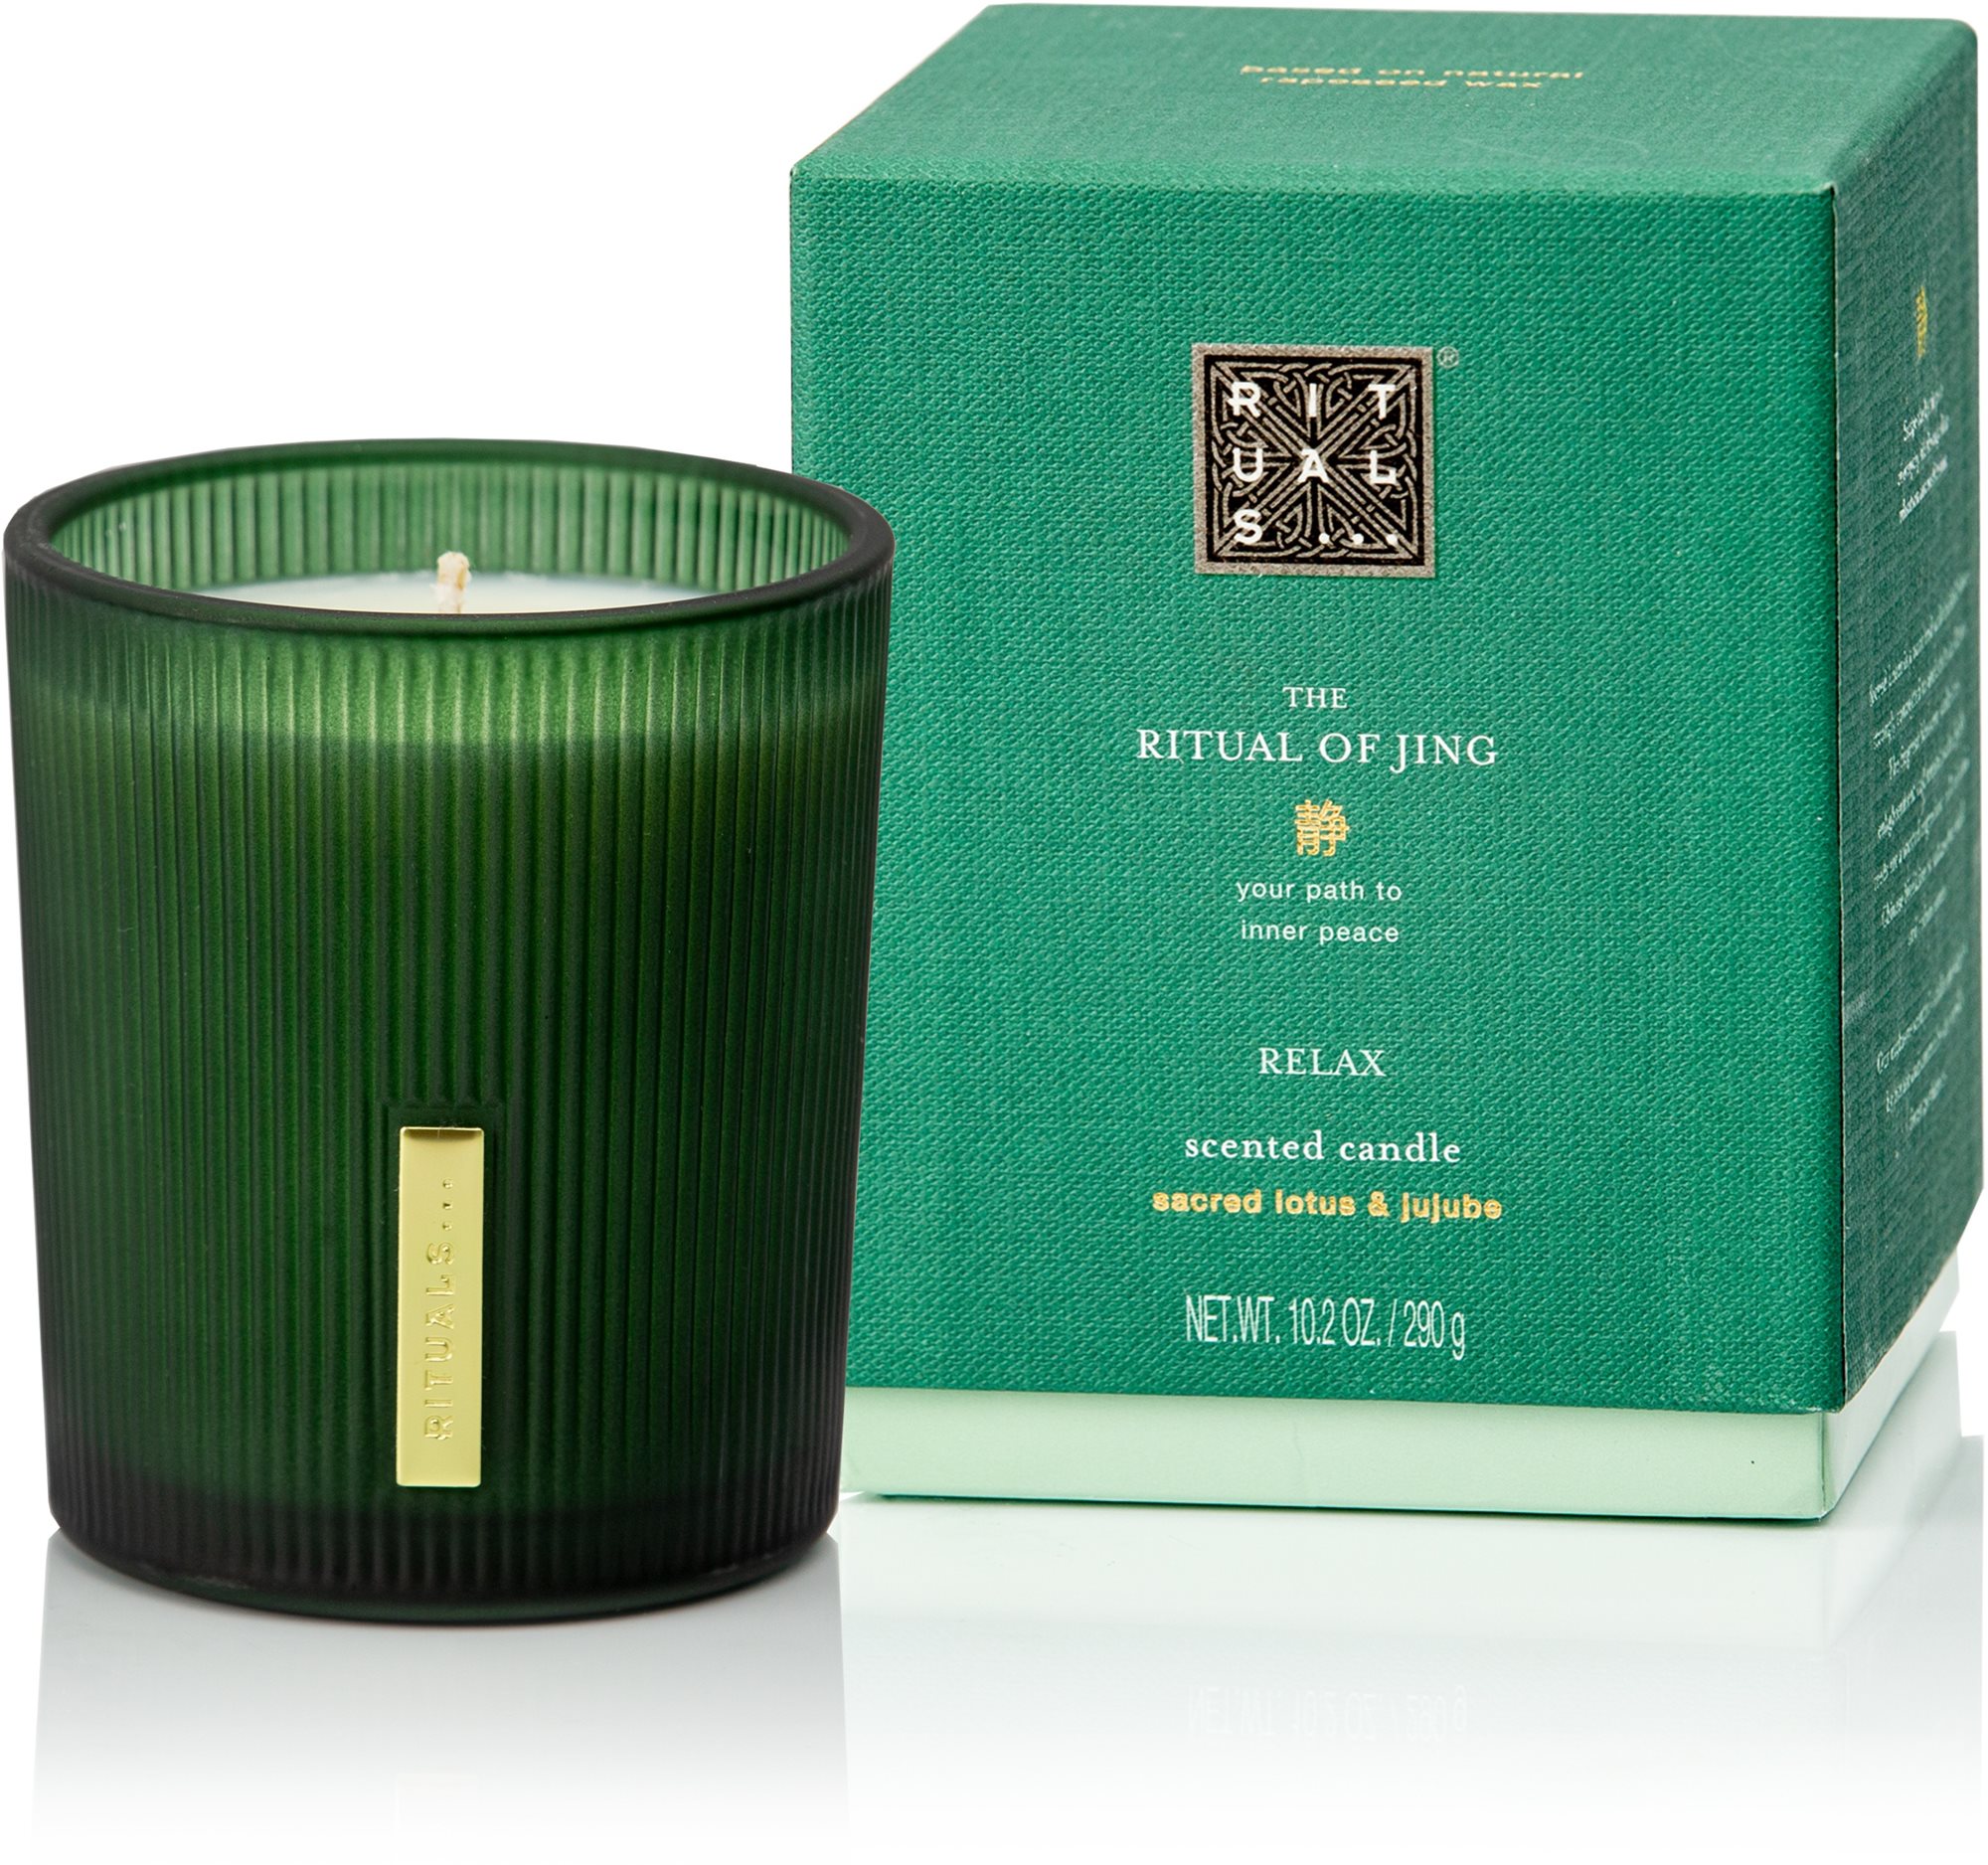 Rituals Illatgyertya The Ritual of Jing (Scented Candle New Edition) 290 g